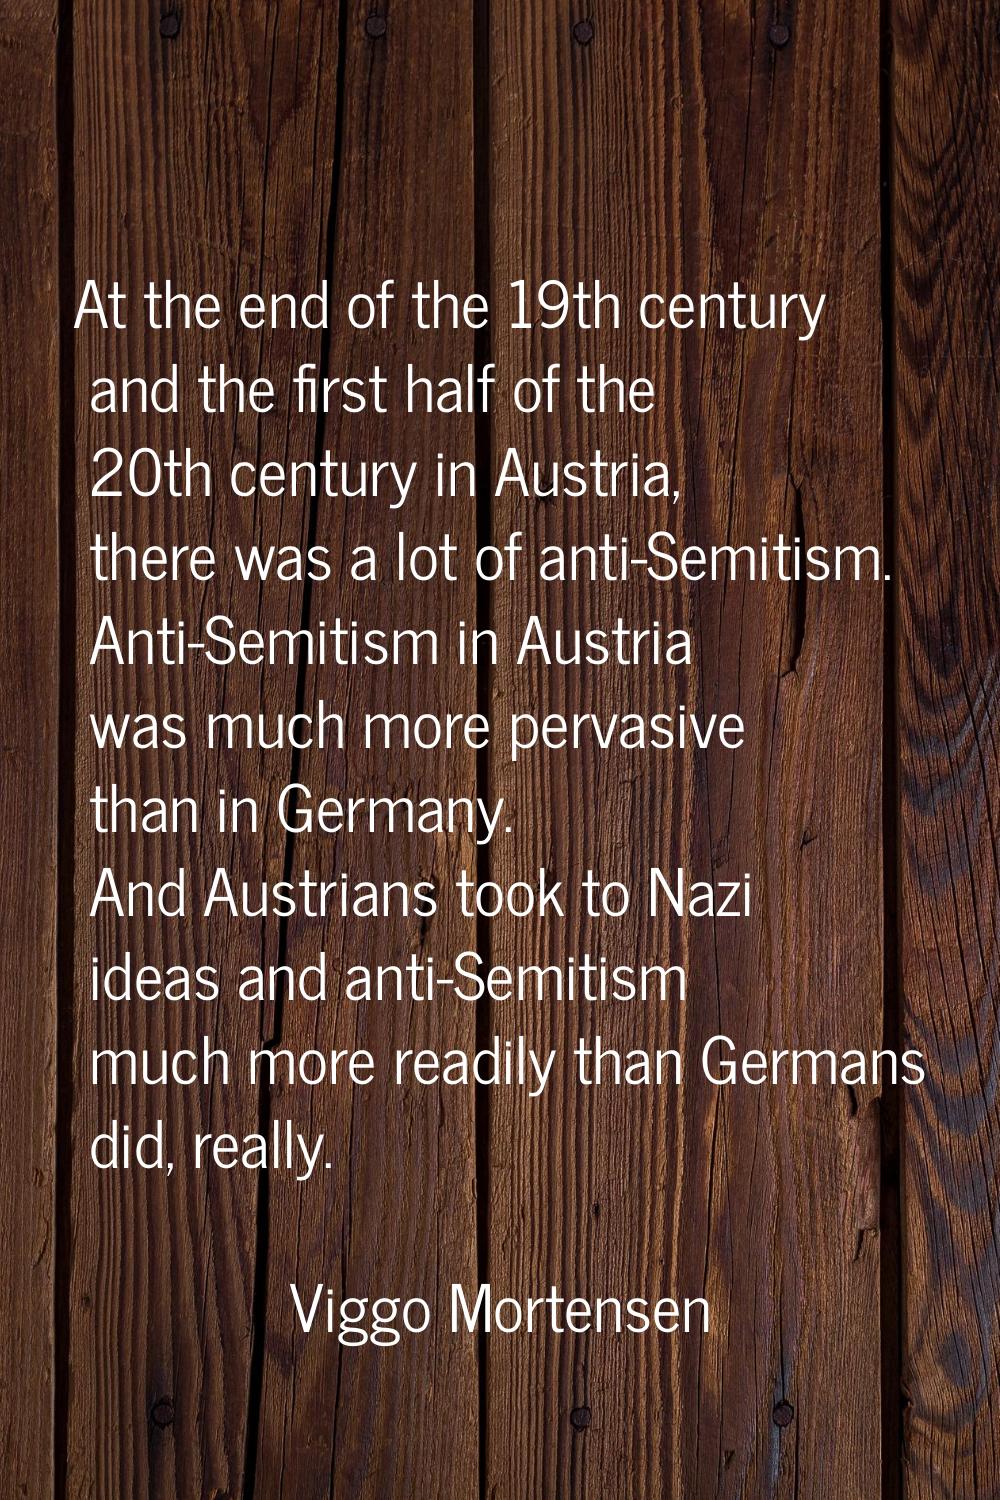 At the end of the 19th century and the first half of the 20th century in Austria, there was a lot o